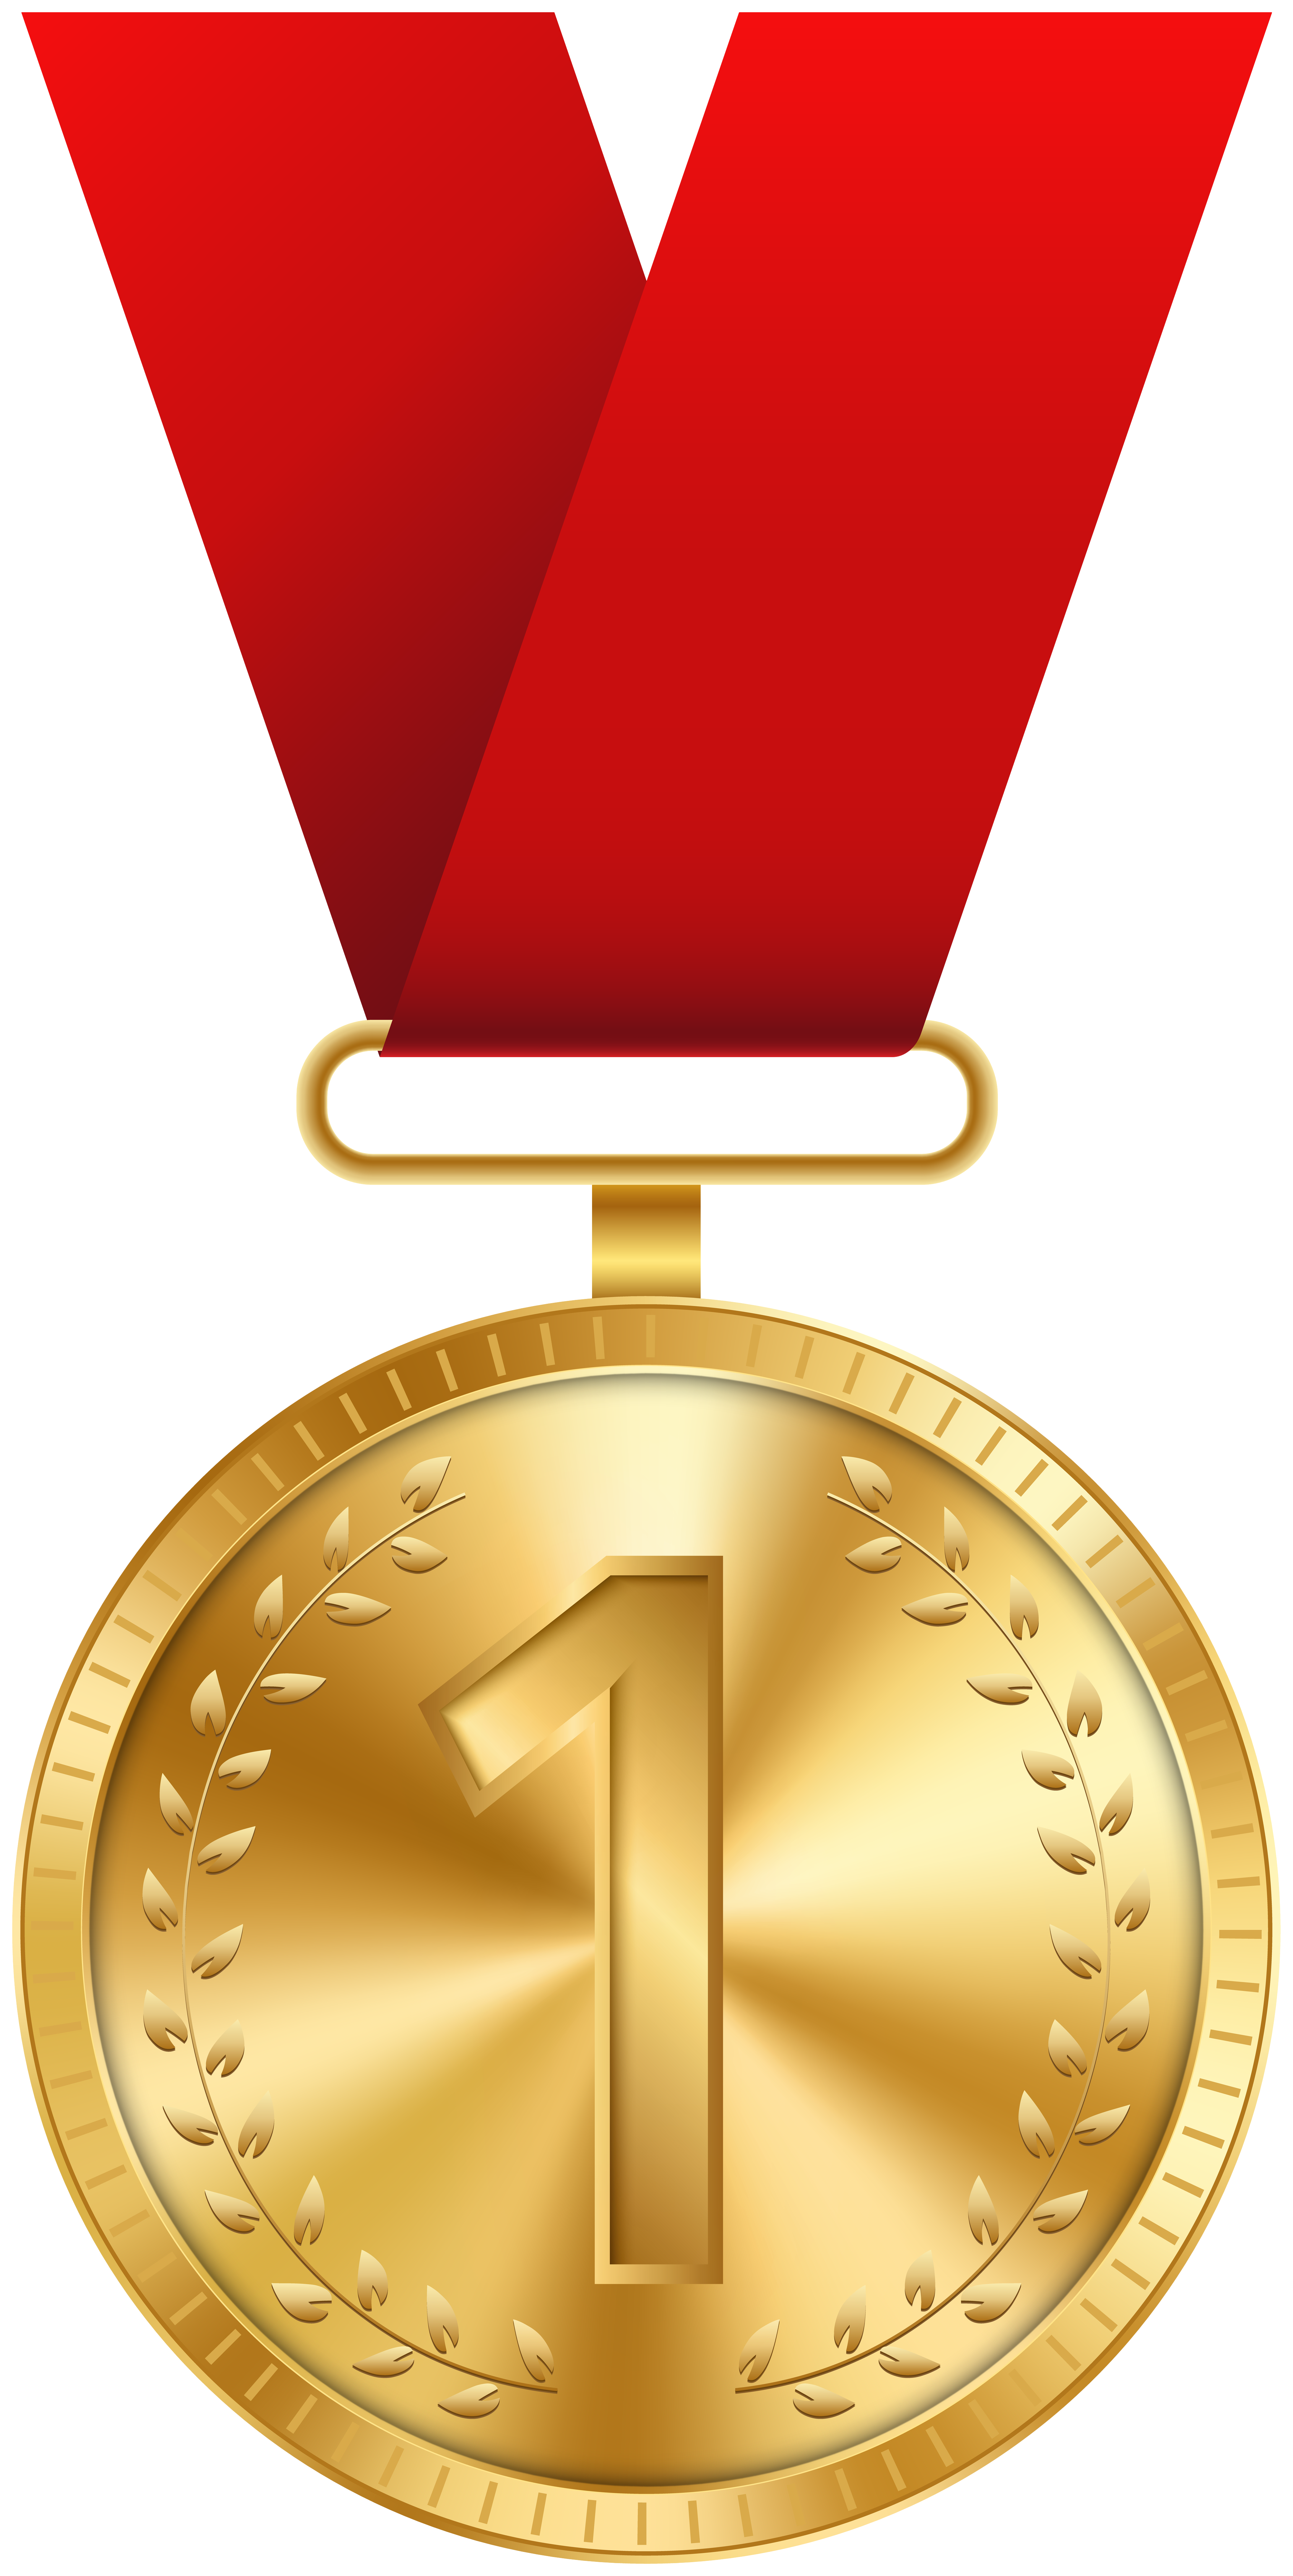 Gold Medal PNG Clip Art Image​-Quality Image and Transparent PNG Free Clipart